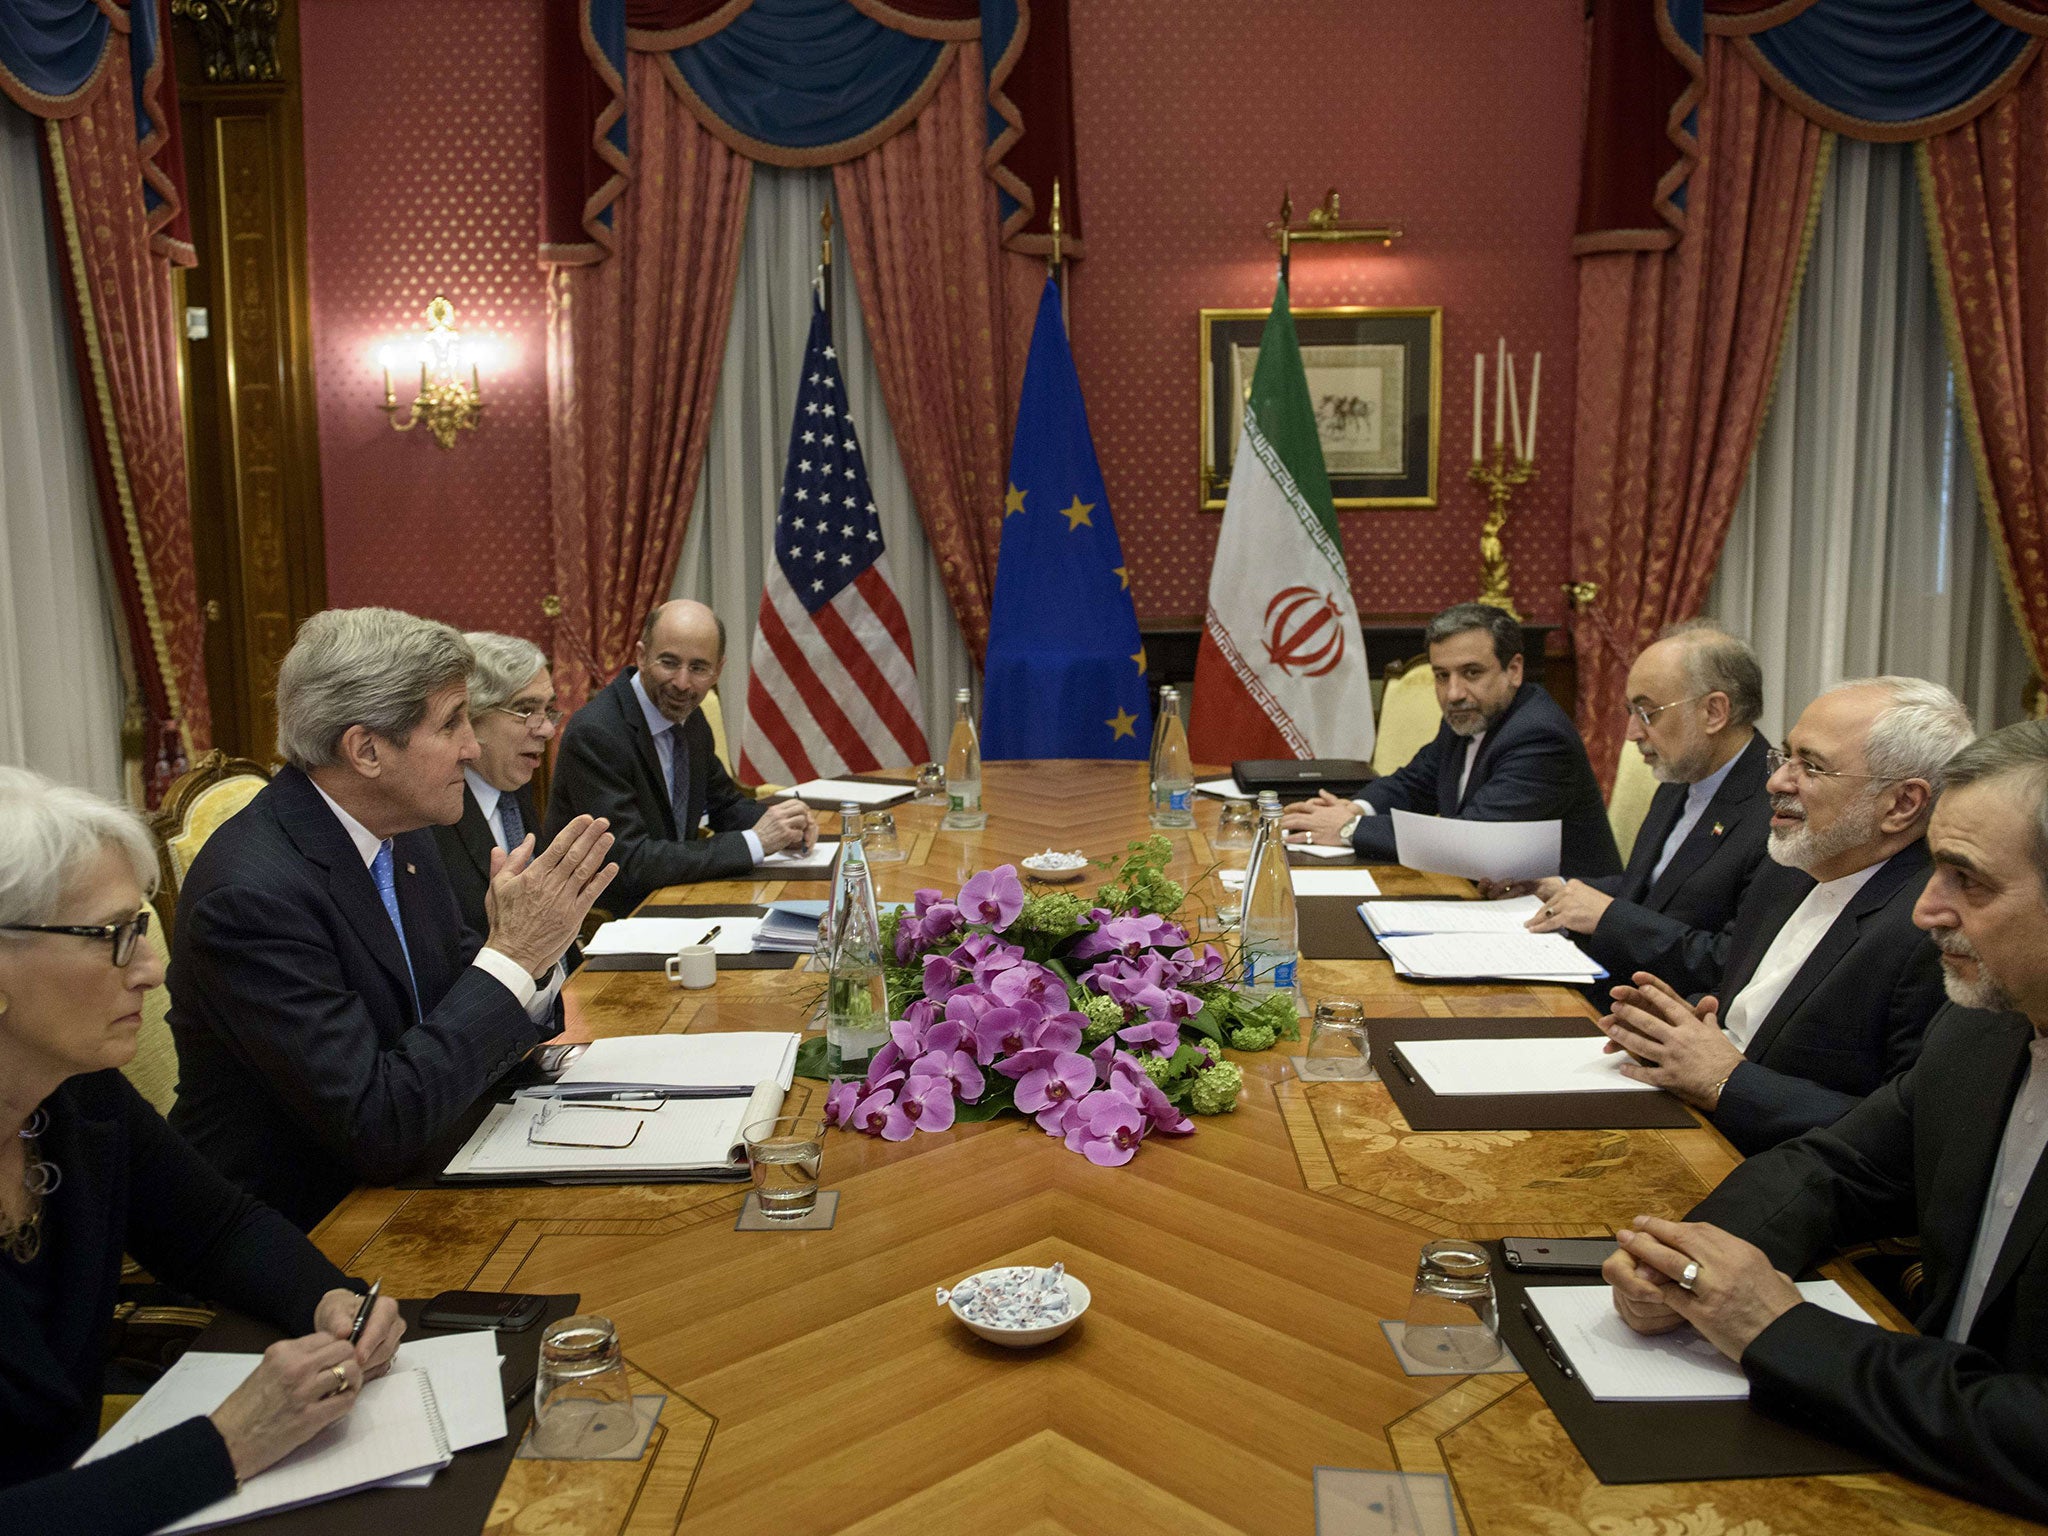 US and Iranian officials in Lausanne including John Kerry, second left, and Mohammad Javad Zarif, second right